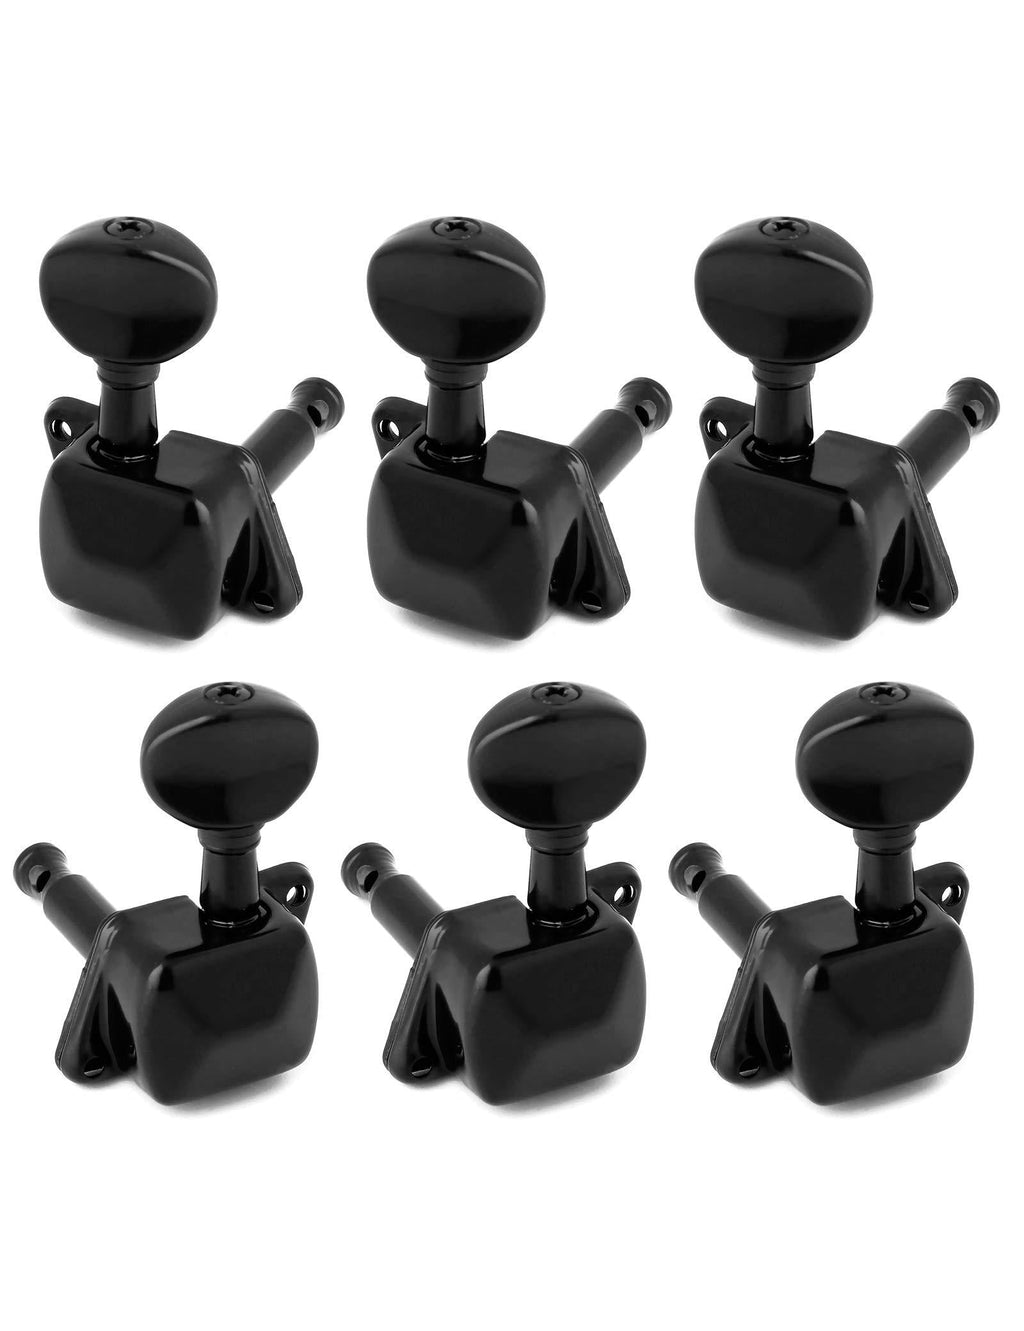 Holmer Guitar String Tuning Pegs Semiclosed Machine Heads Tuners Tuning Keys Oval Button 3 Left 3 Right for Acoustic Guitar or Electric Guitar Black.